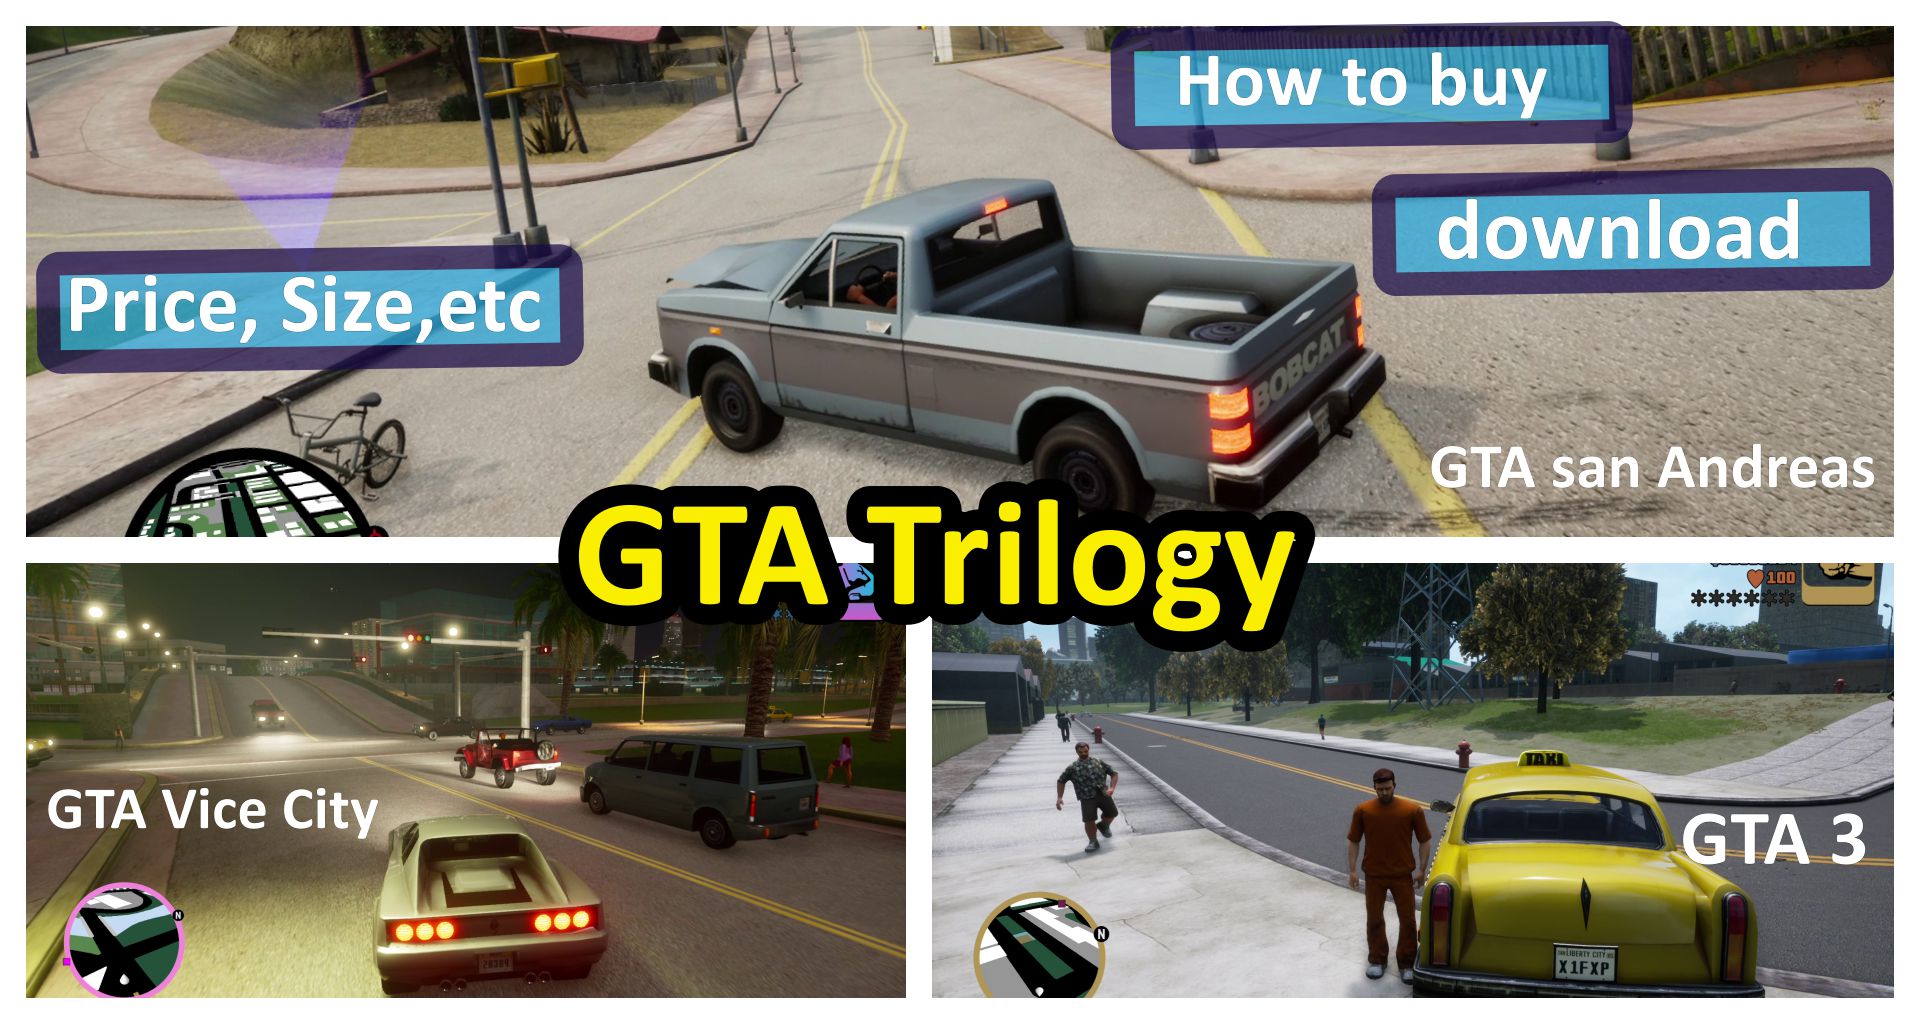 GTA Trilogy Definitive Edition How to buy & download, Price, Size, etc